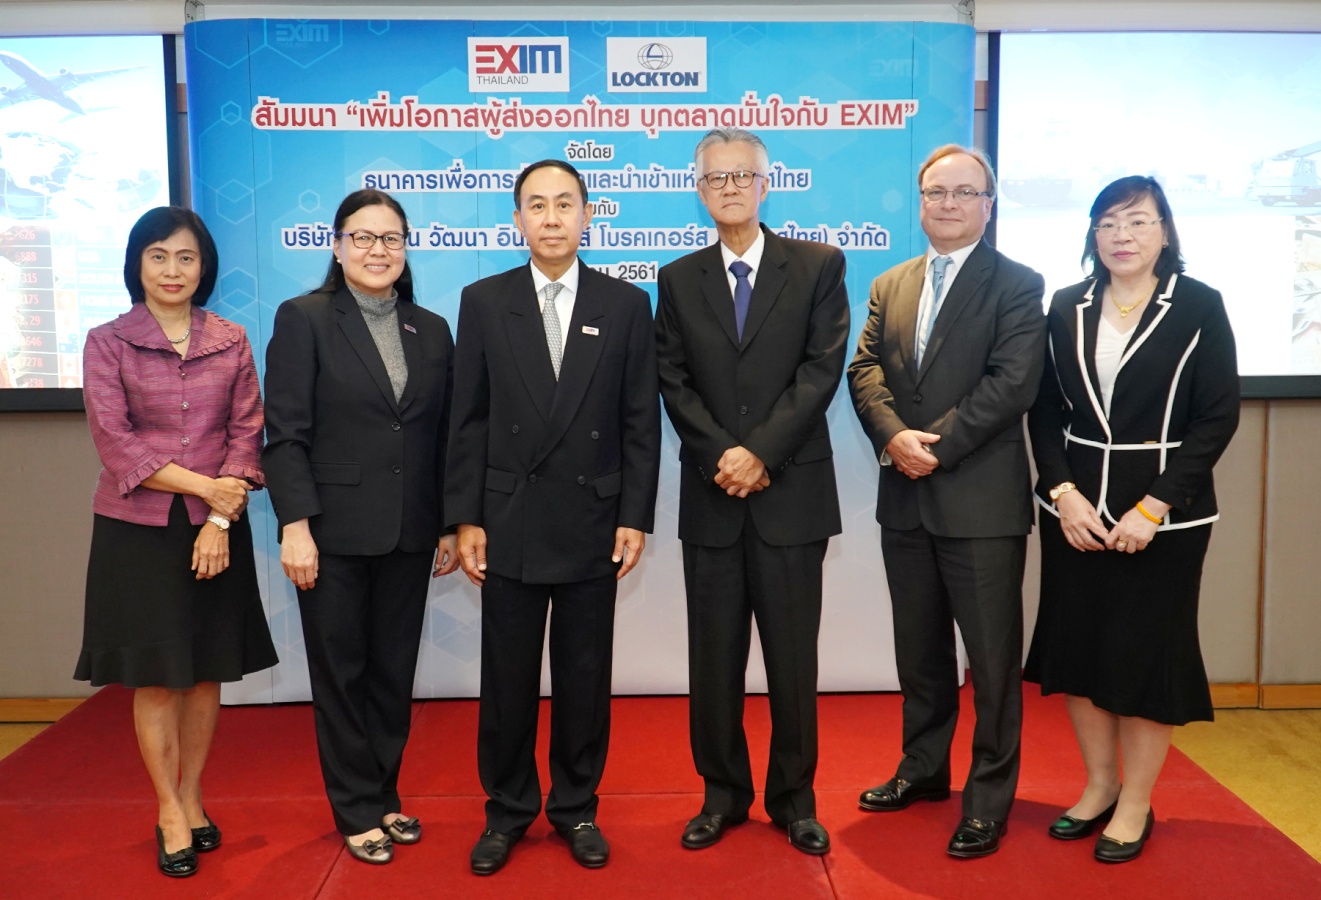 EXIM Thailand Holds International Risks Hedging Seminar to Support Thai Businesses’ Market Expansion with Confidence